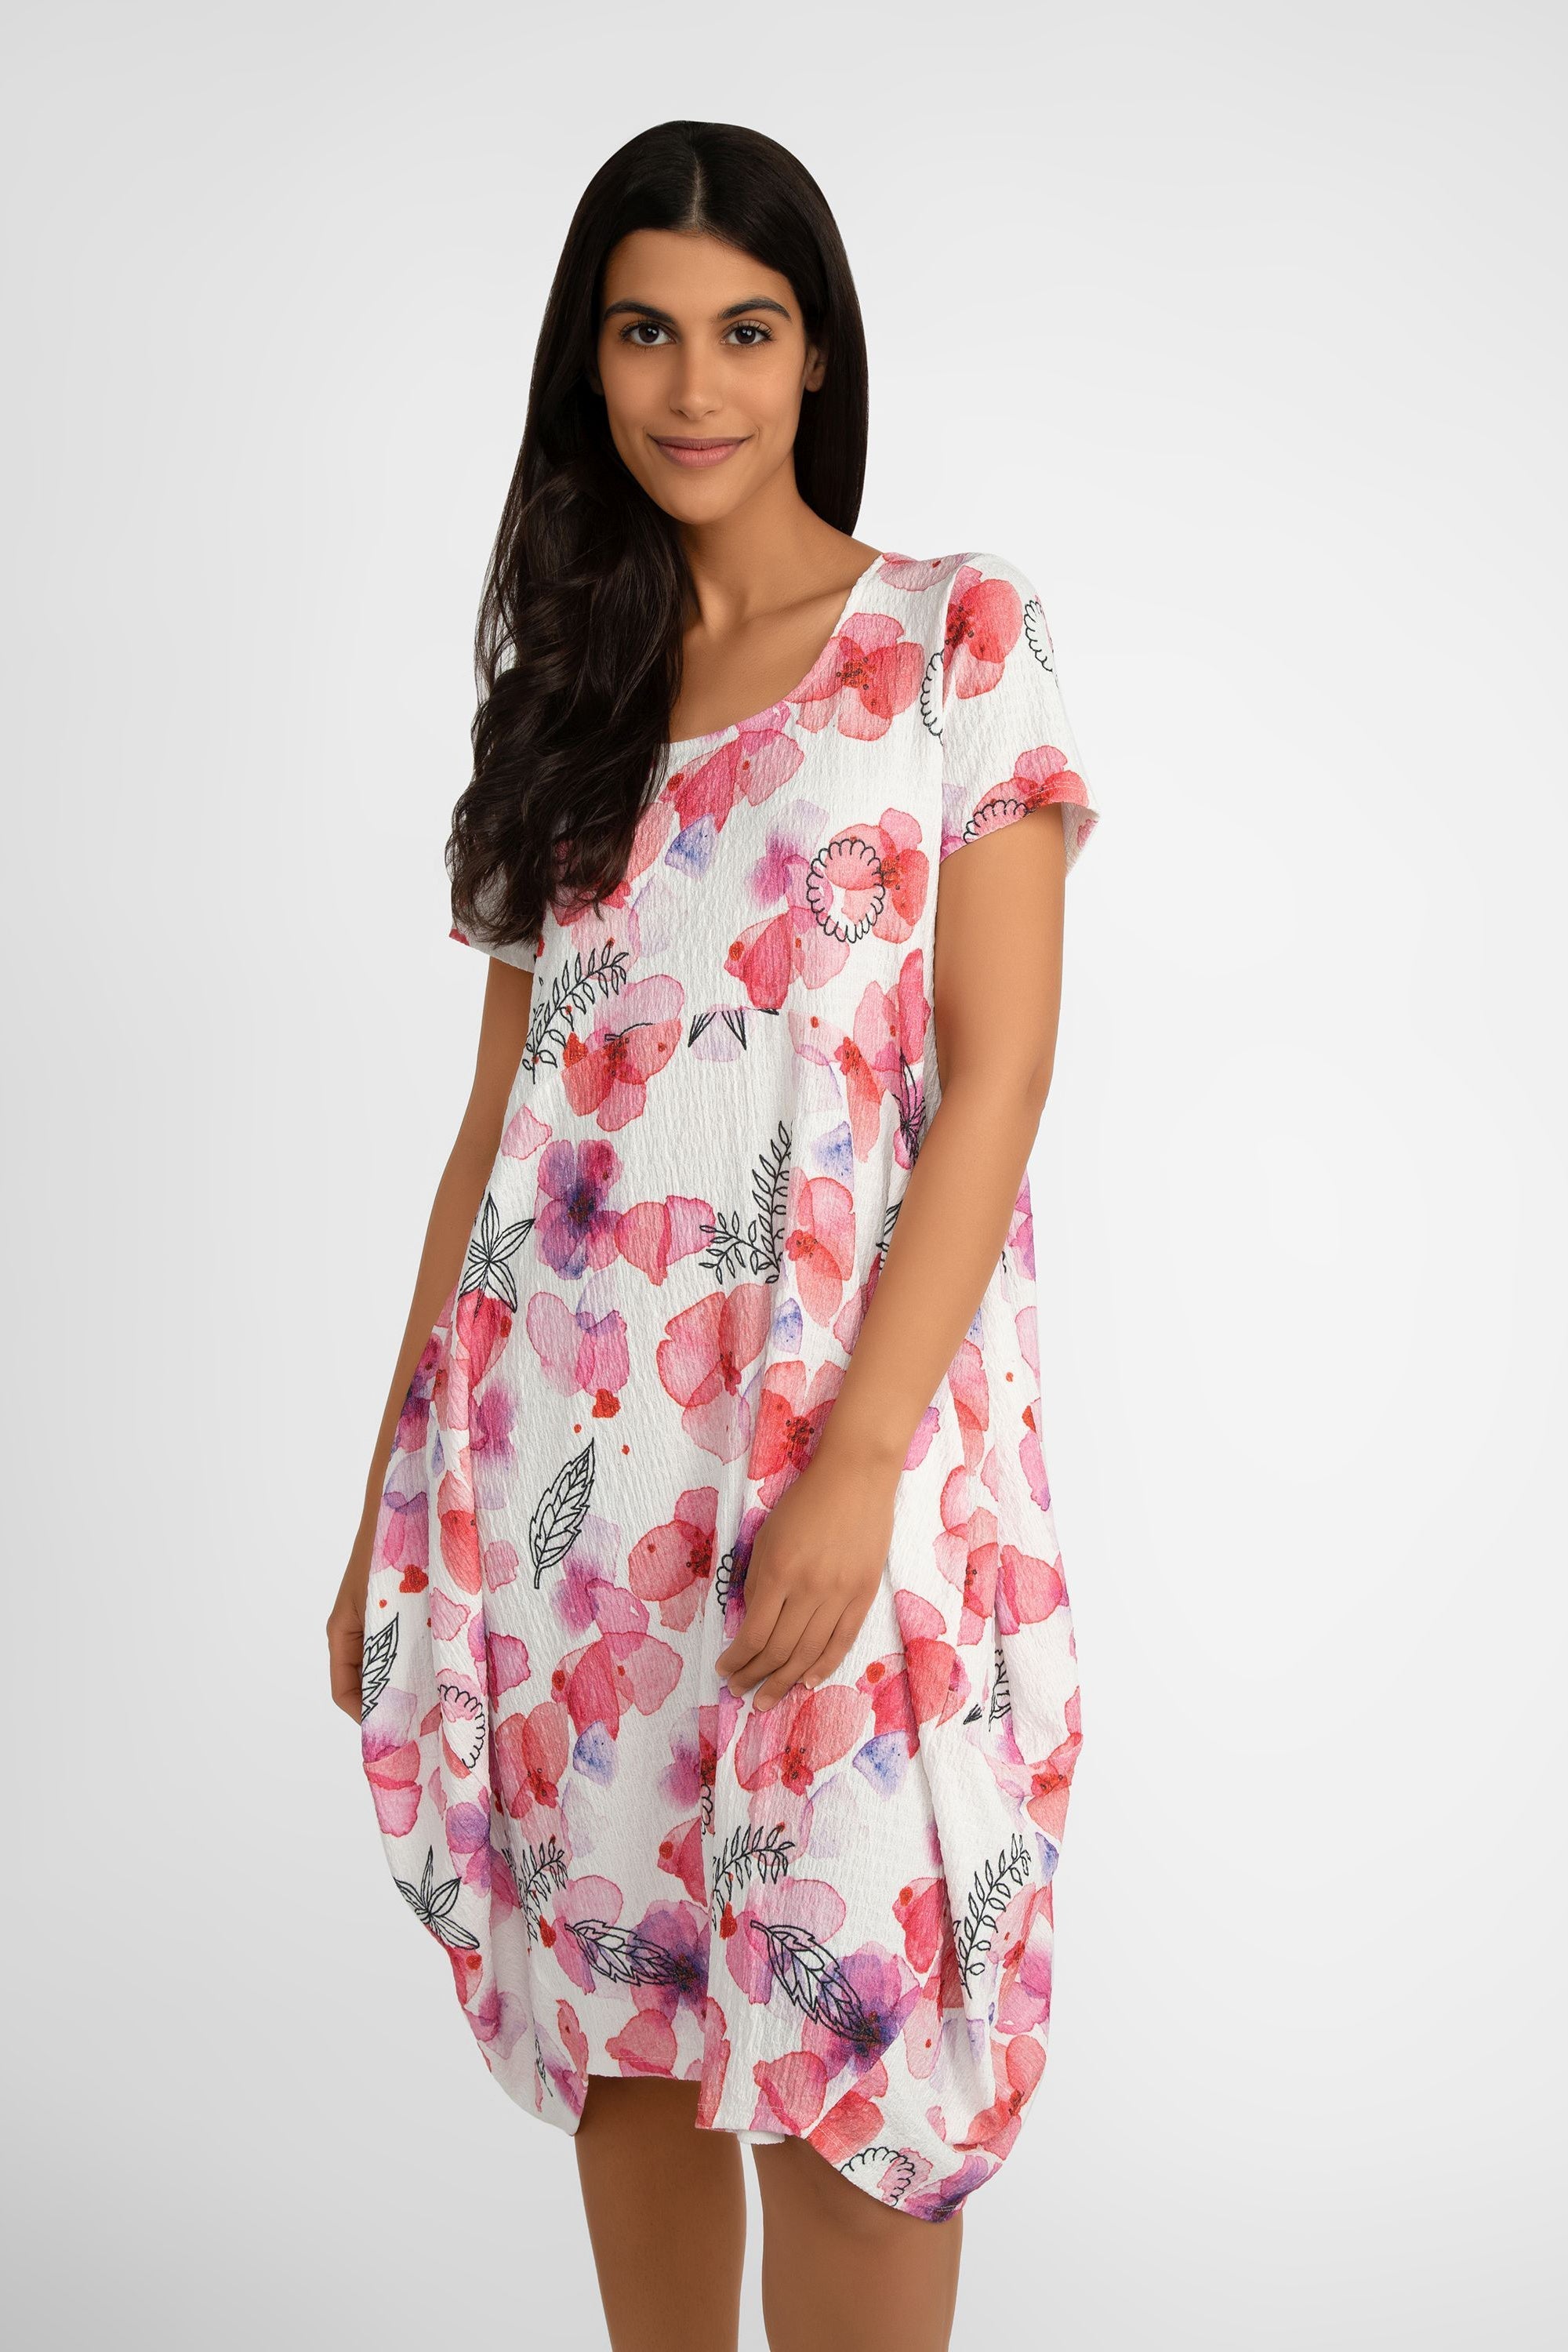 Compli K (33566) Women's Short Sleeve White With Pink Floral Cocoon Midi Dress